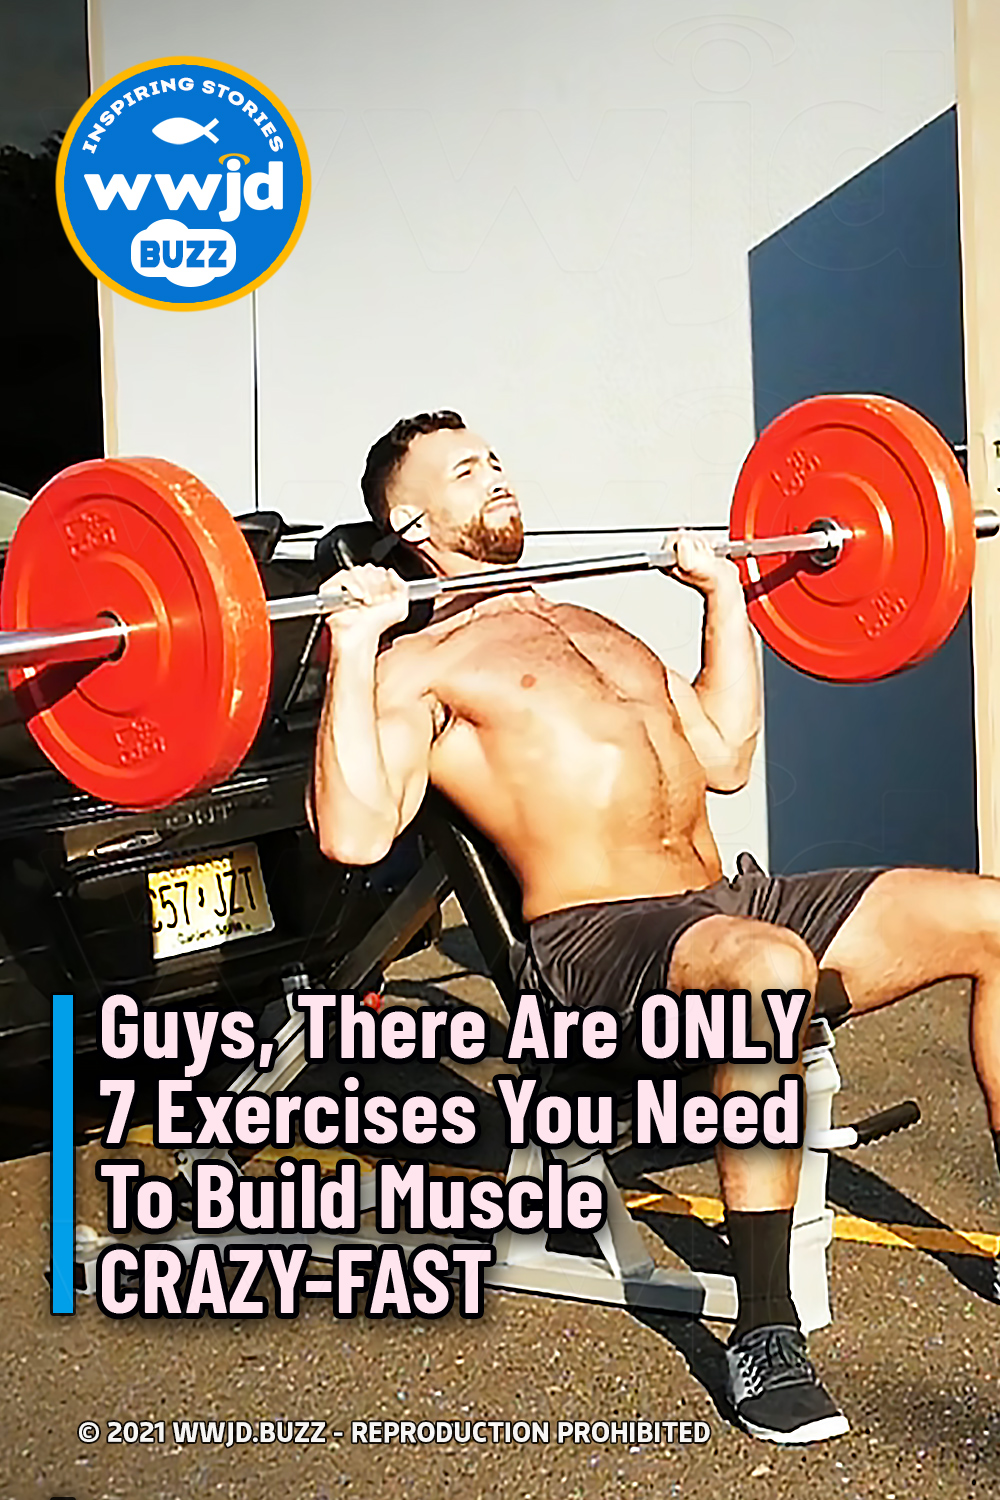 Guys, There Are ONLY 7 Exercises You Need To Build Muscle CRAZY-FAST